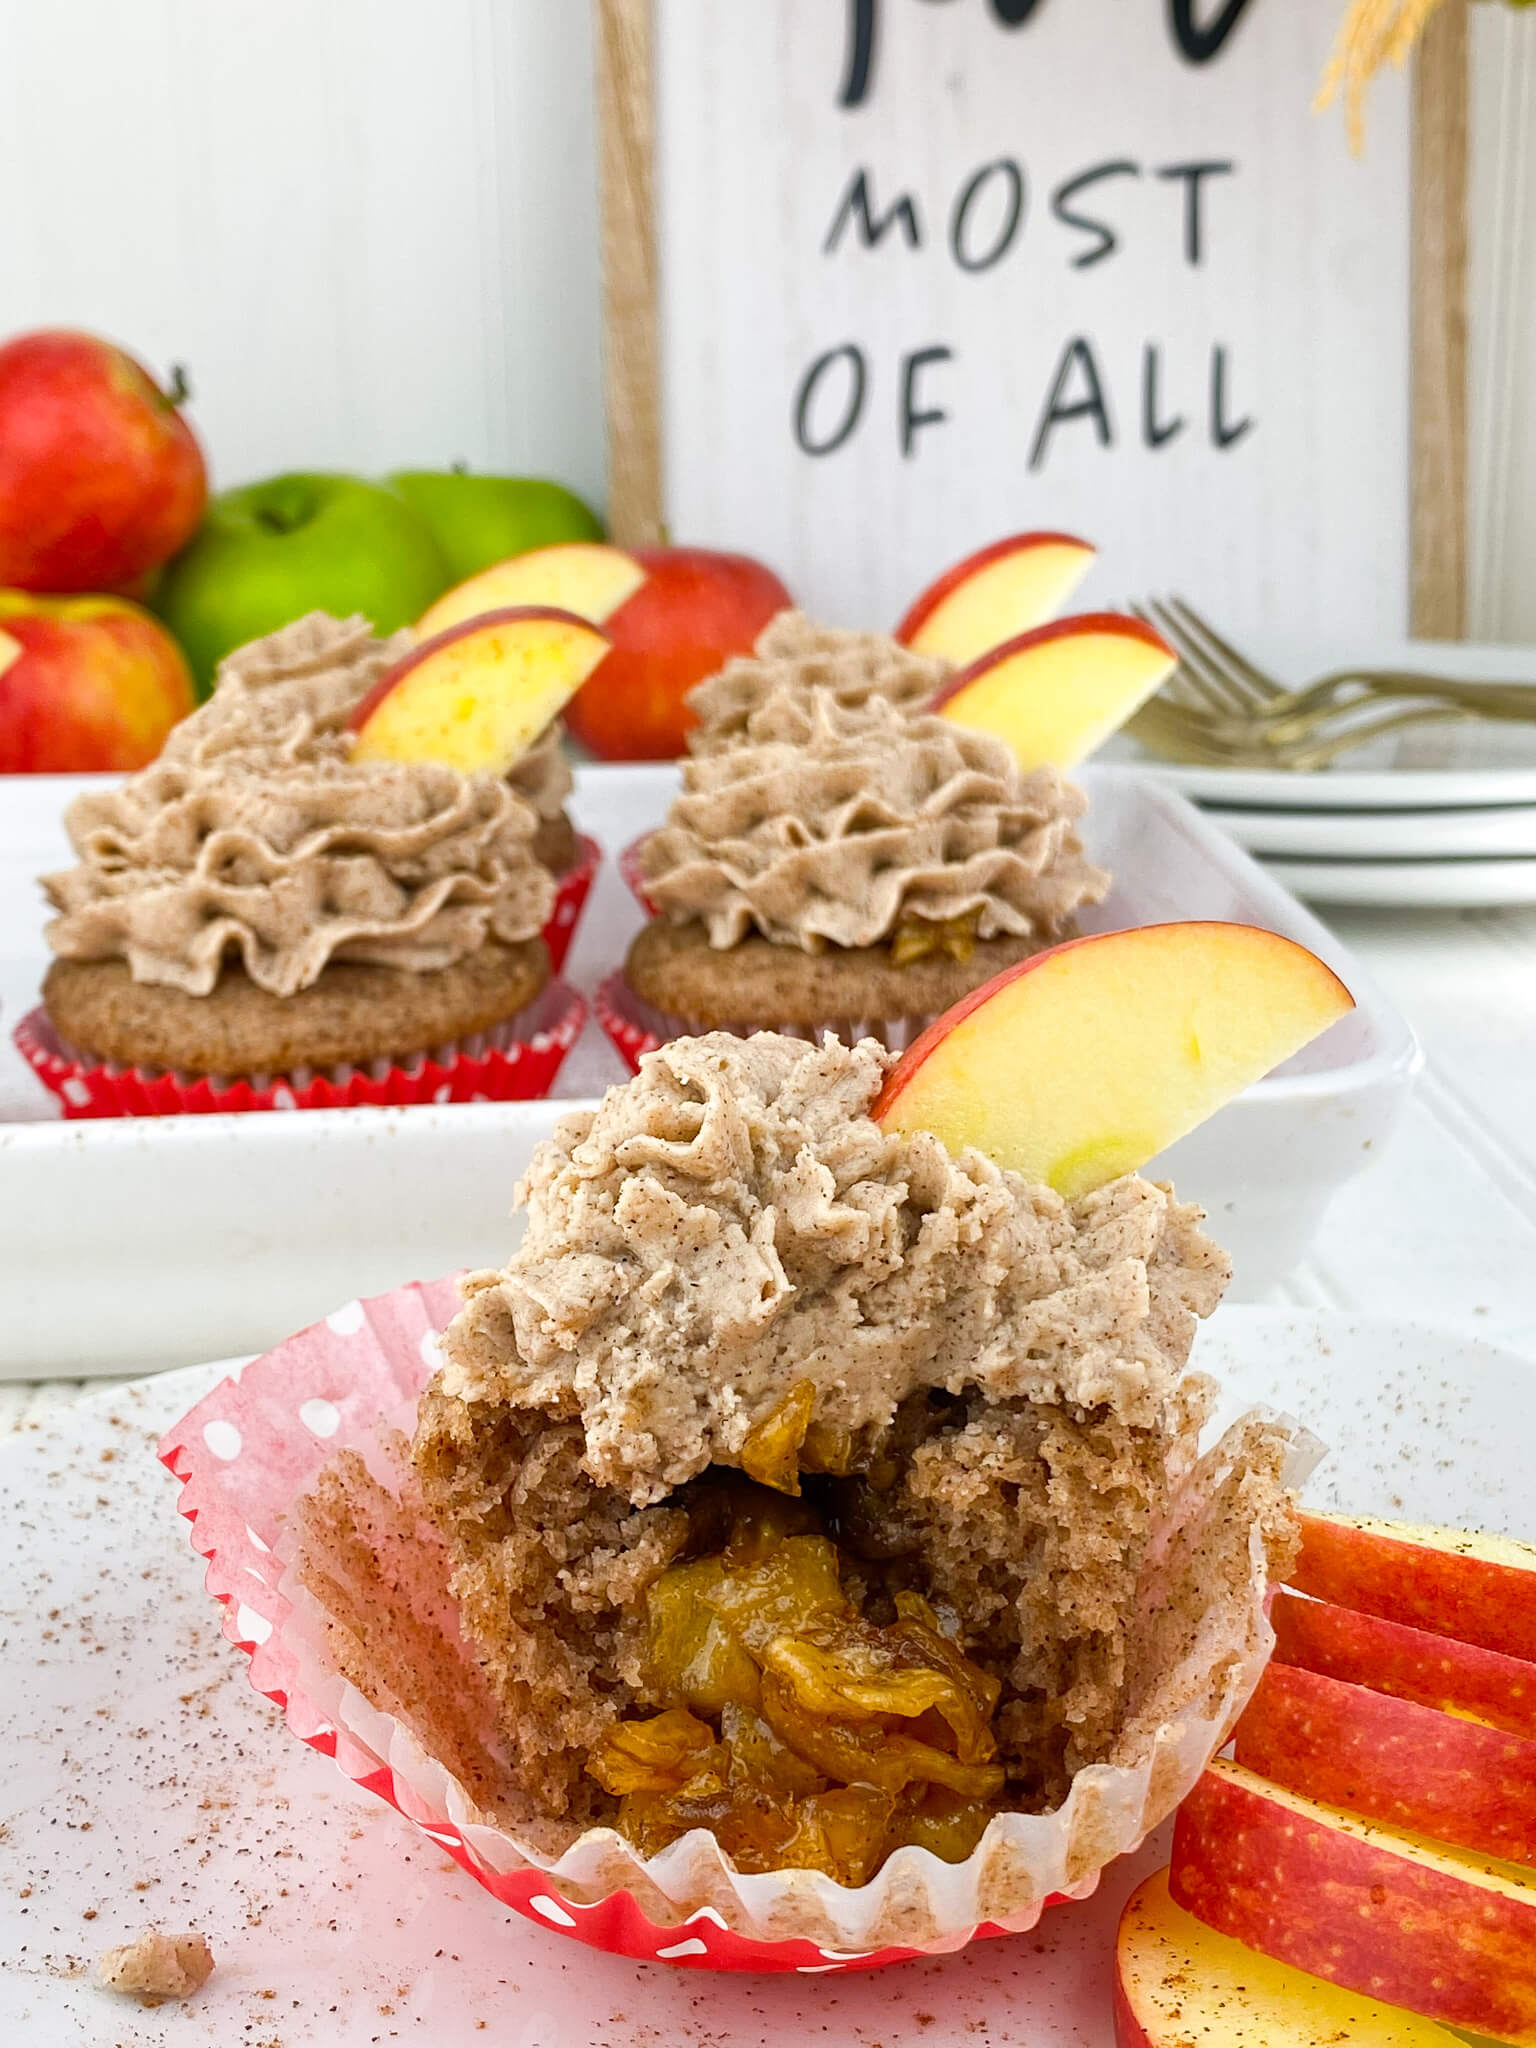 Kate's Safe & Sweet - Apple Pie Cupcakes Filled with Apple